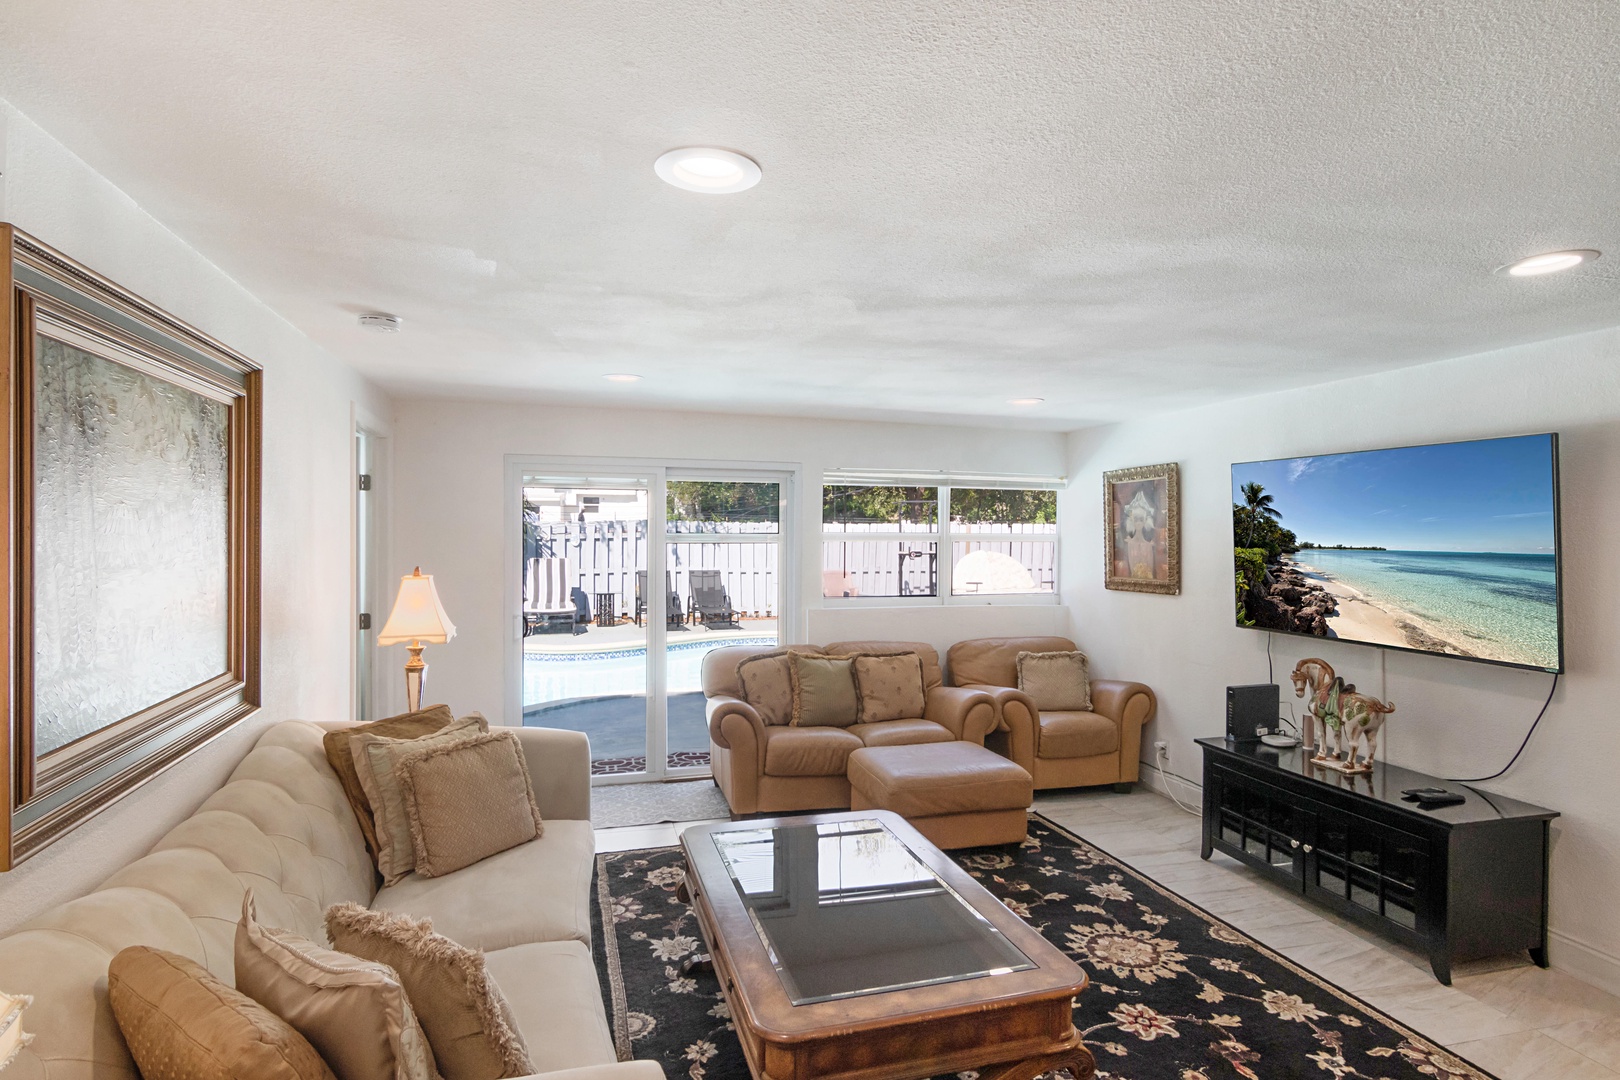 Seating in the living room for up to 6. Pool access only steps away!